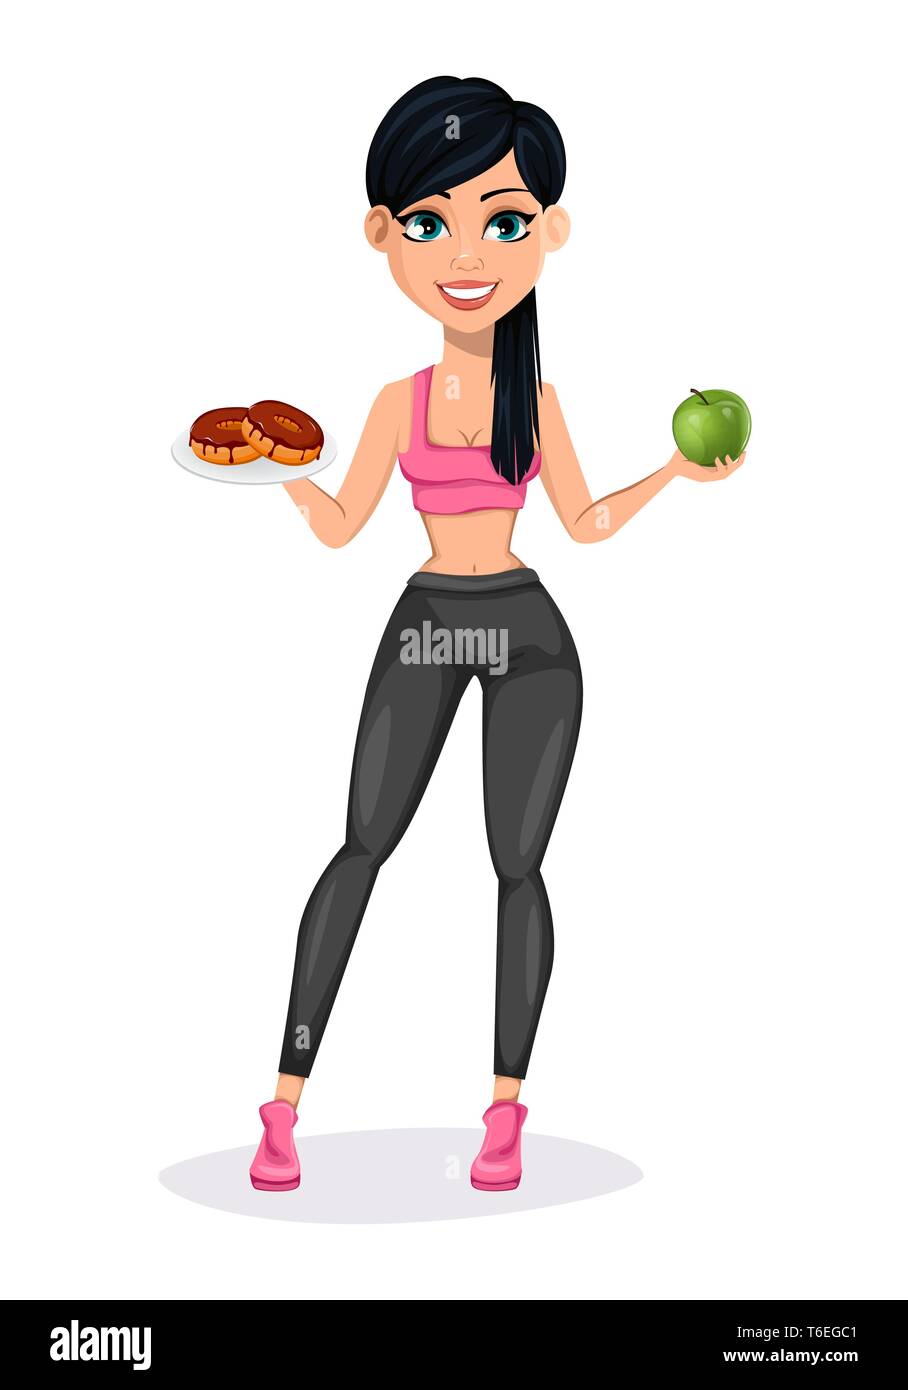 Pretty sporty lady, attractive fitness woman. Cheerful cartoon character holding donuts and apple. Vector illustration on white background Stock Vector